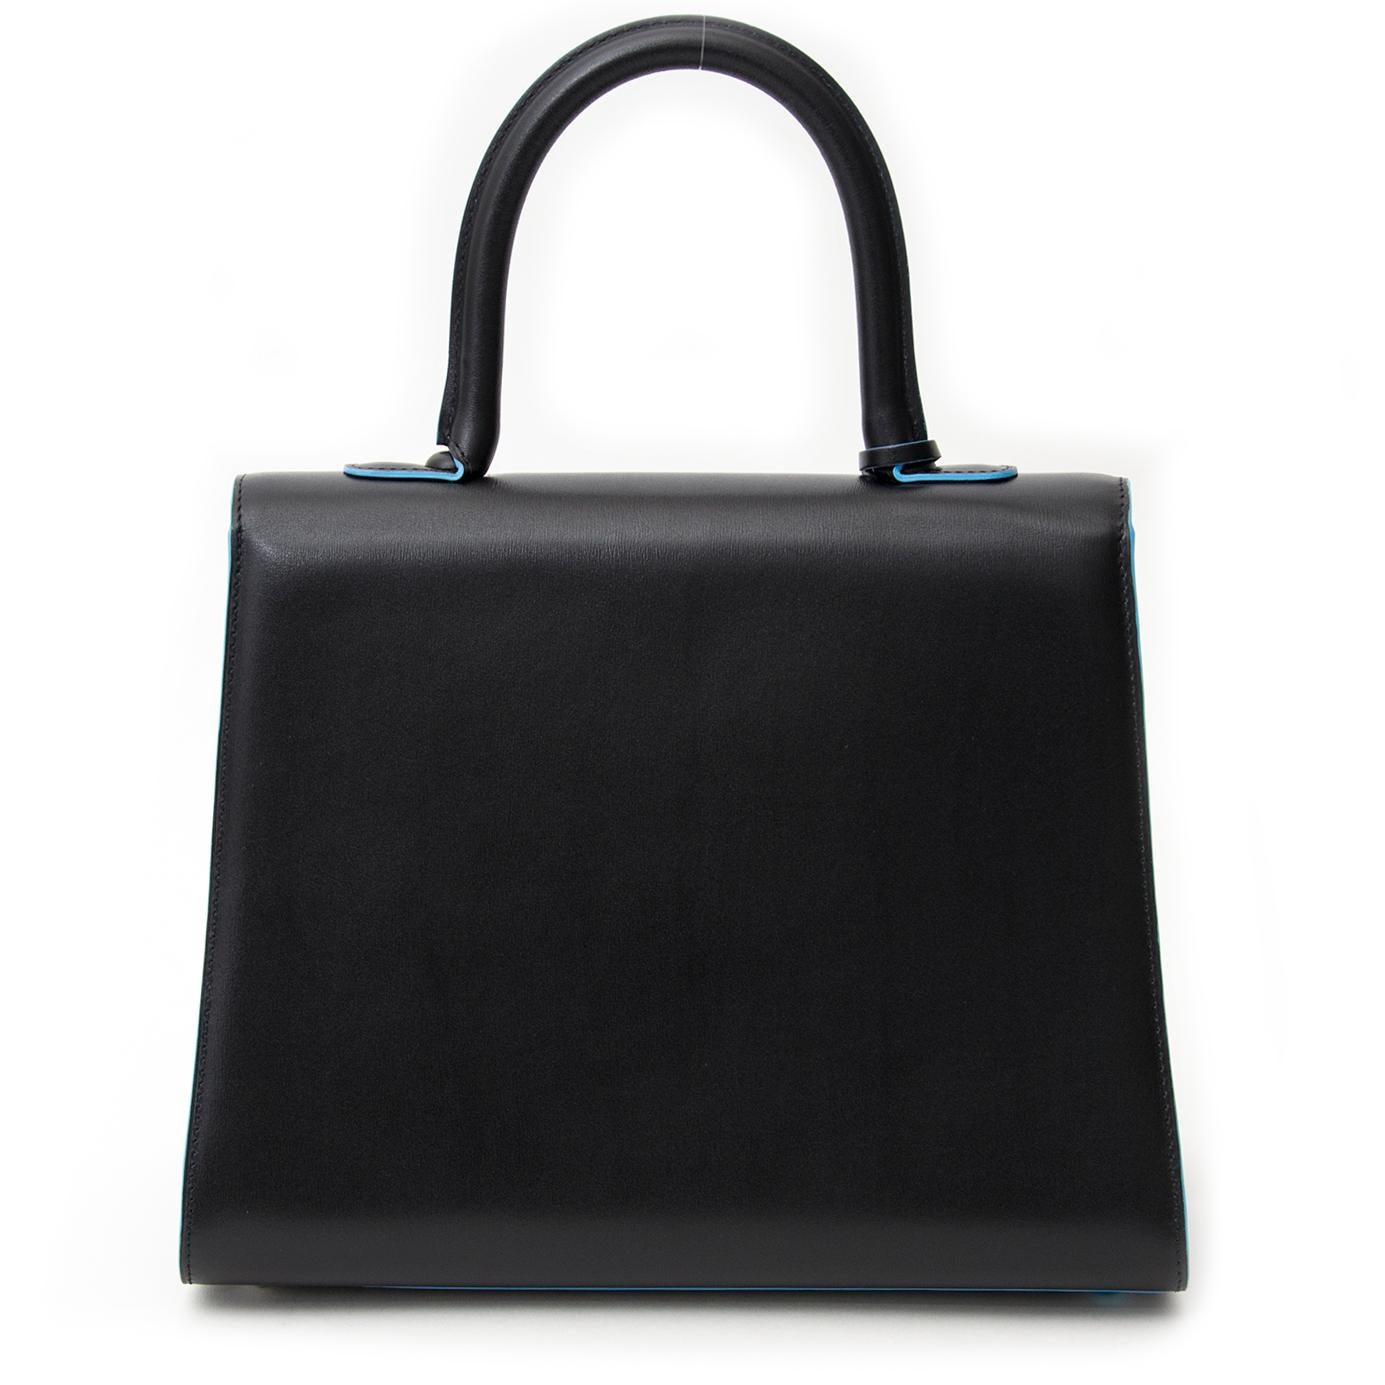 With this exclusive Brillant Delvaux pays homage to the beloved Belgian artist René Magritte. This playful and unique Delvaux with blue details is infused with the spirit of surrealism. The interior features a cloudy sky printed on lambskin and has